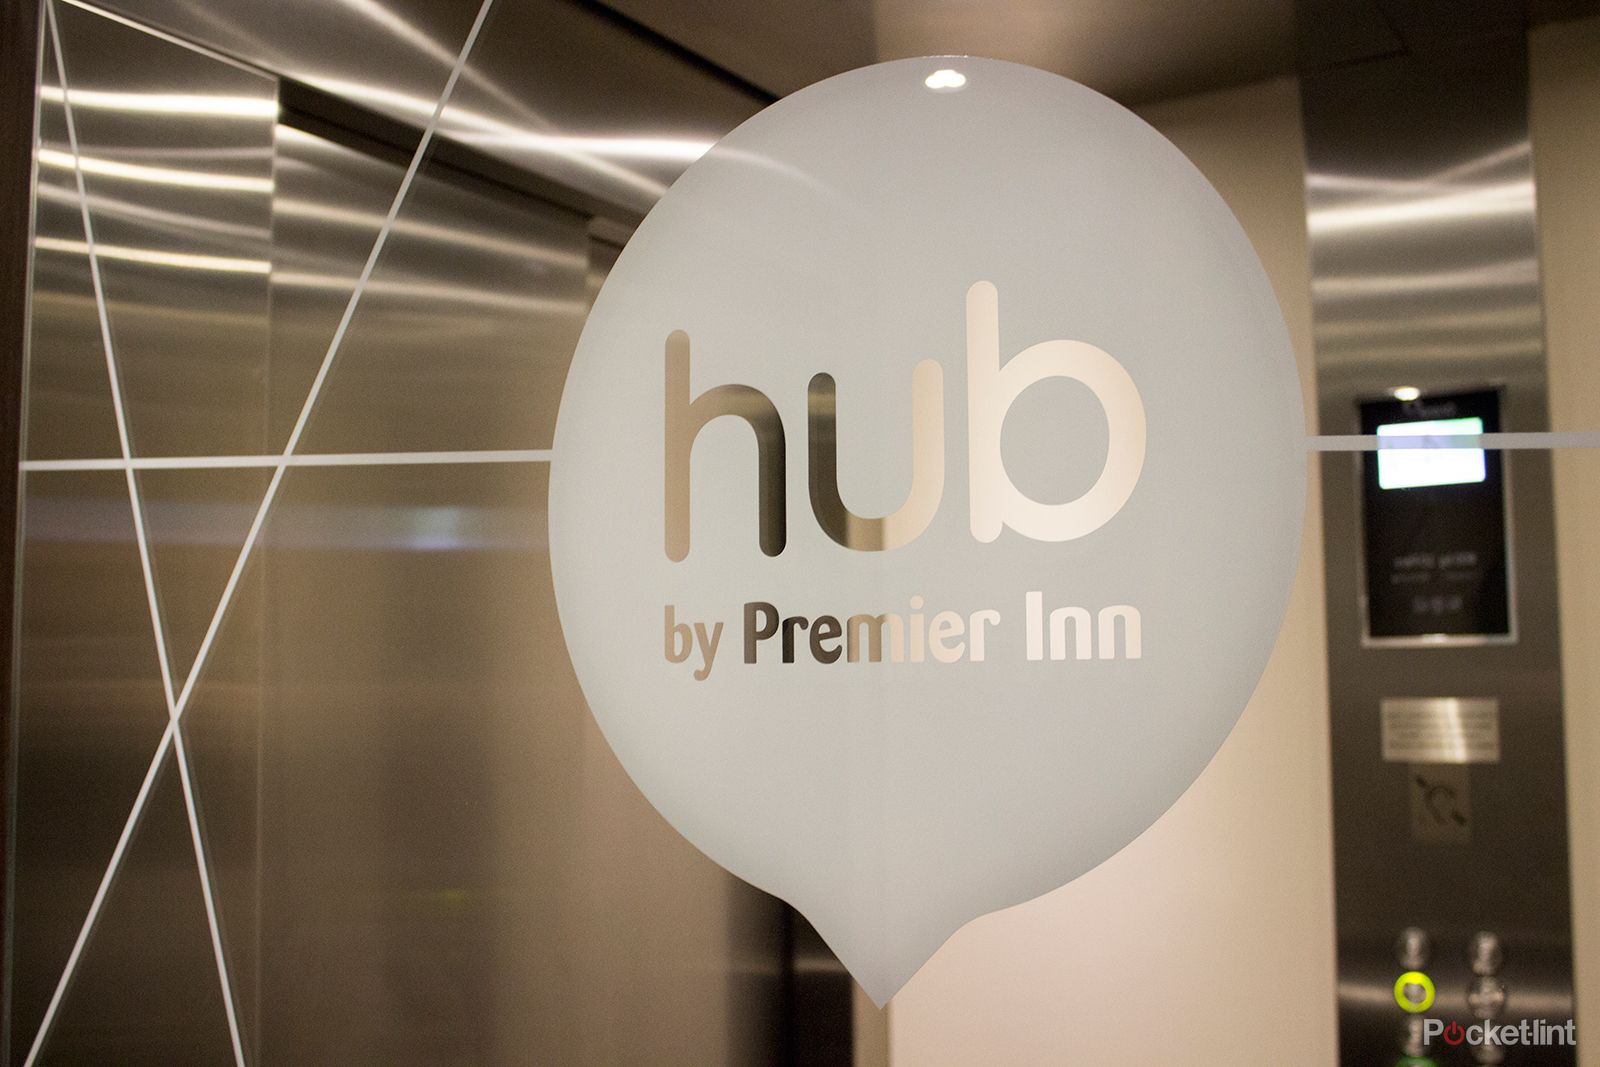 hub by premier inn what it’s like to spend a night in the app controlled high tech hotel room of the future image 1